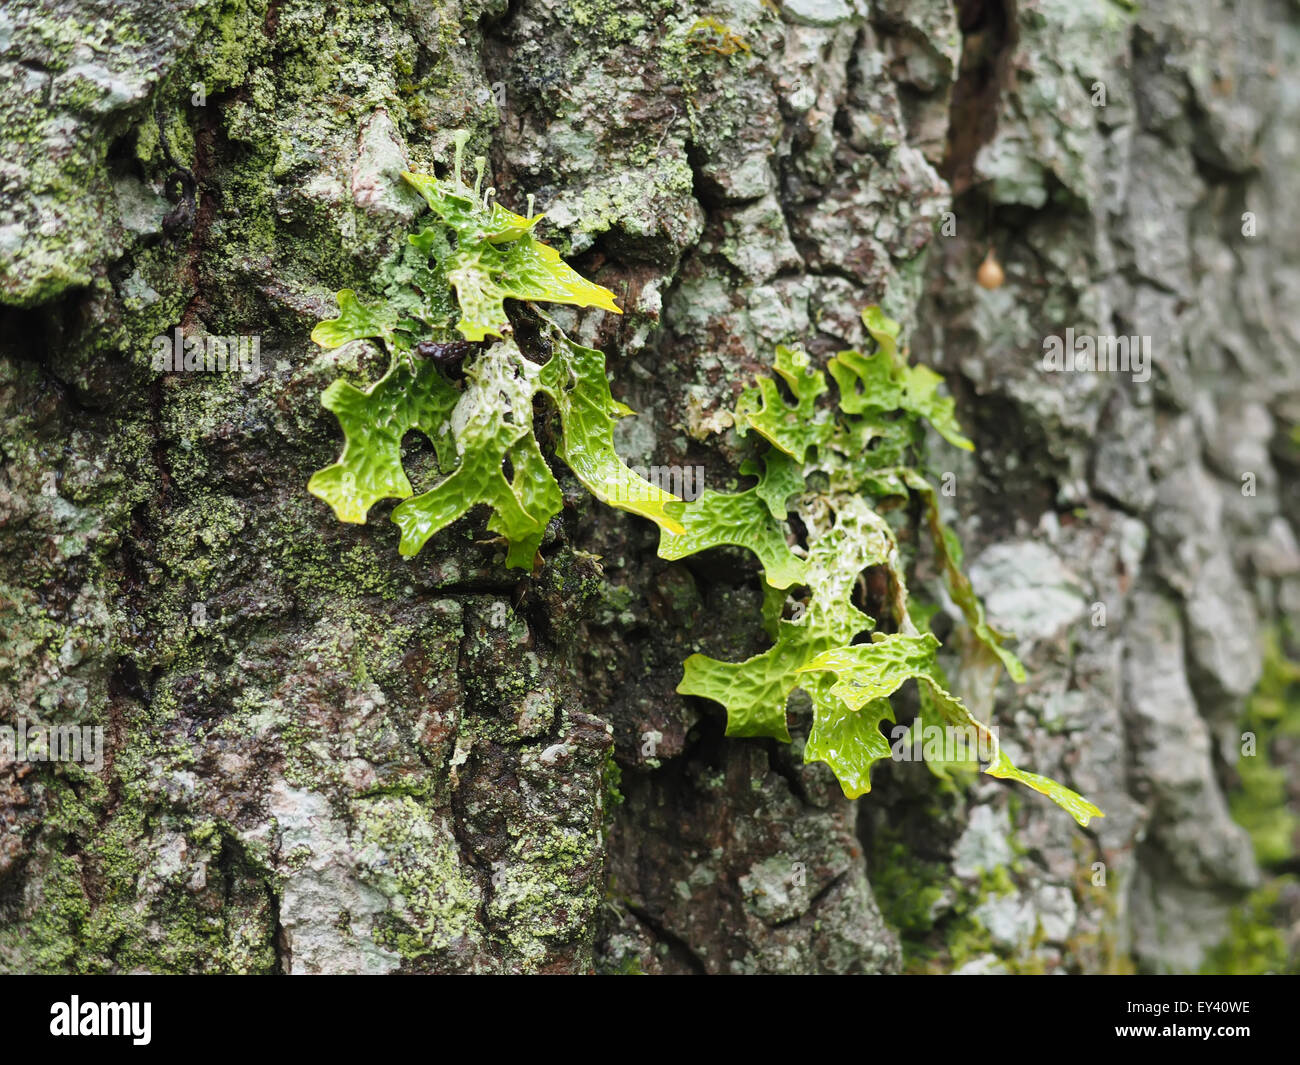 Lobaria pulmonaria on tree in forest Stock Photo